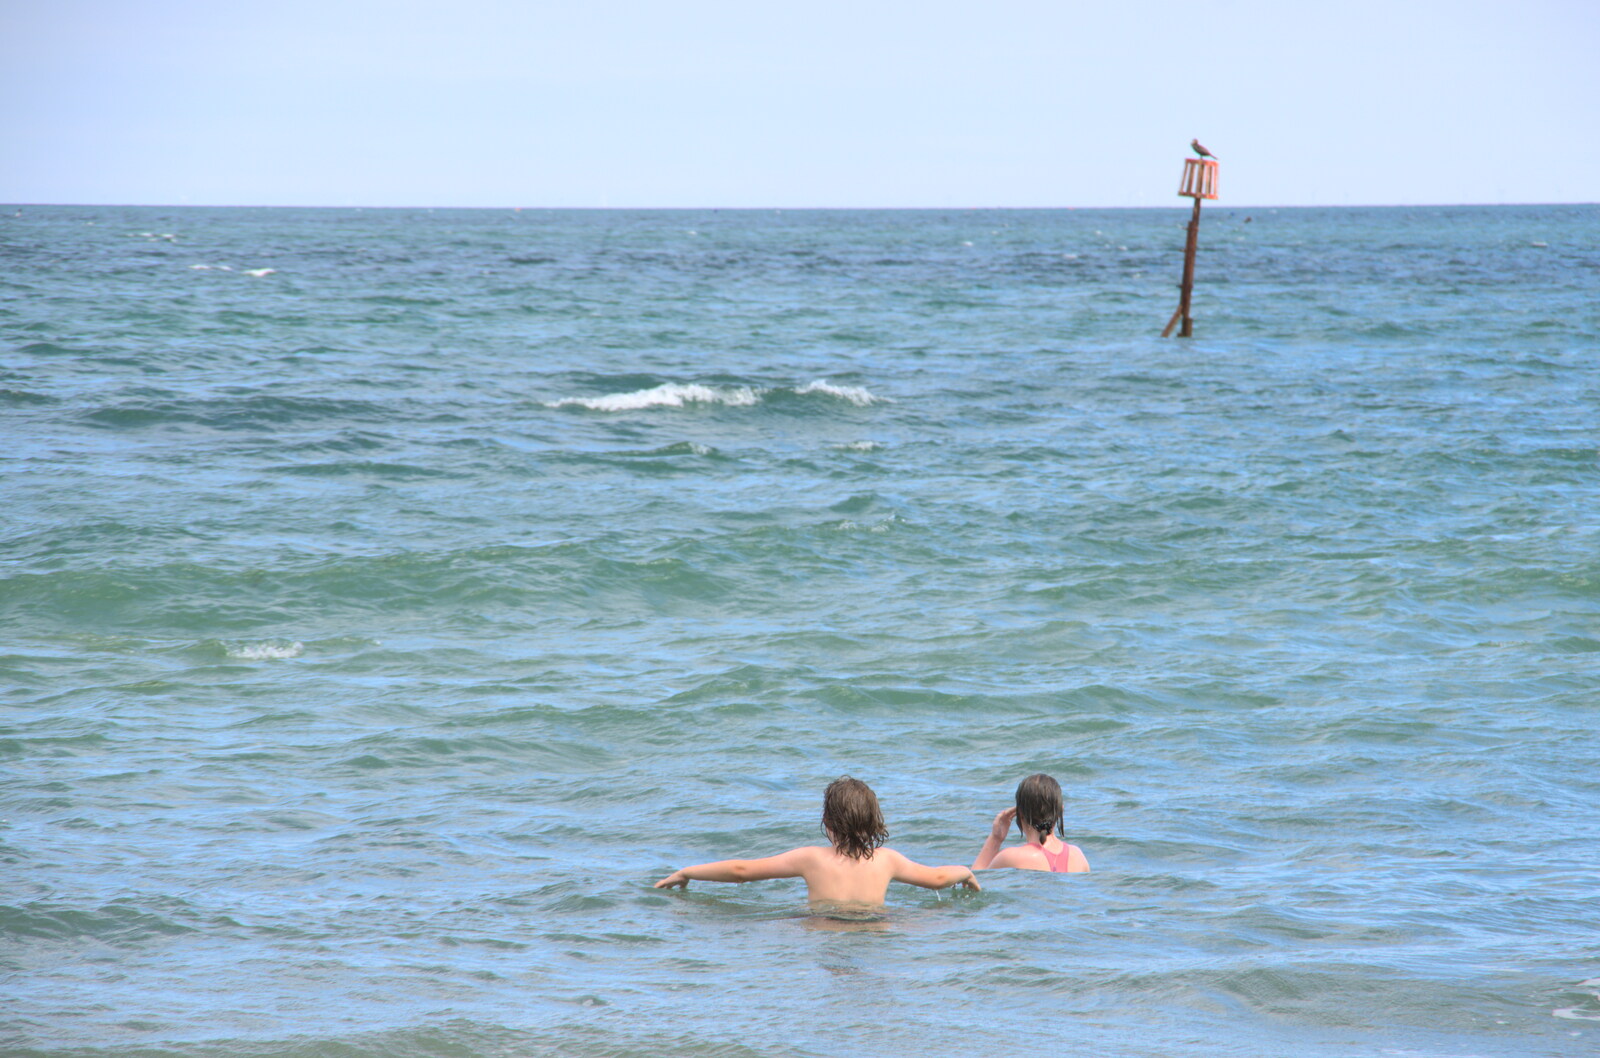 Fred and Lydia swim in the sea, for about a minute from Camping on the Coast, East Runton, North Norfolk - 25th July 2020